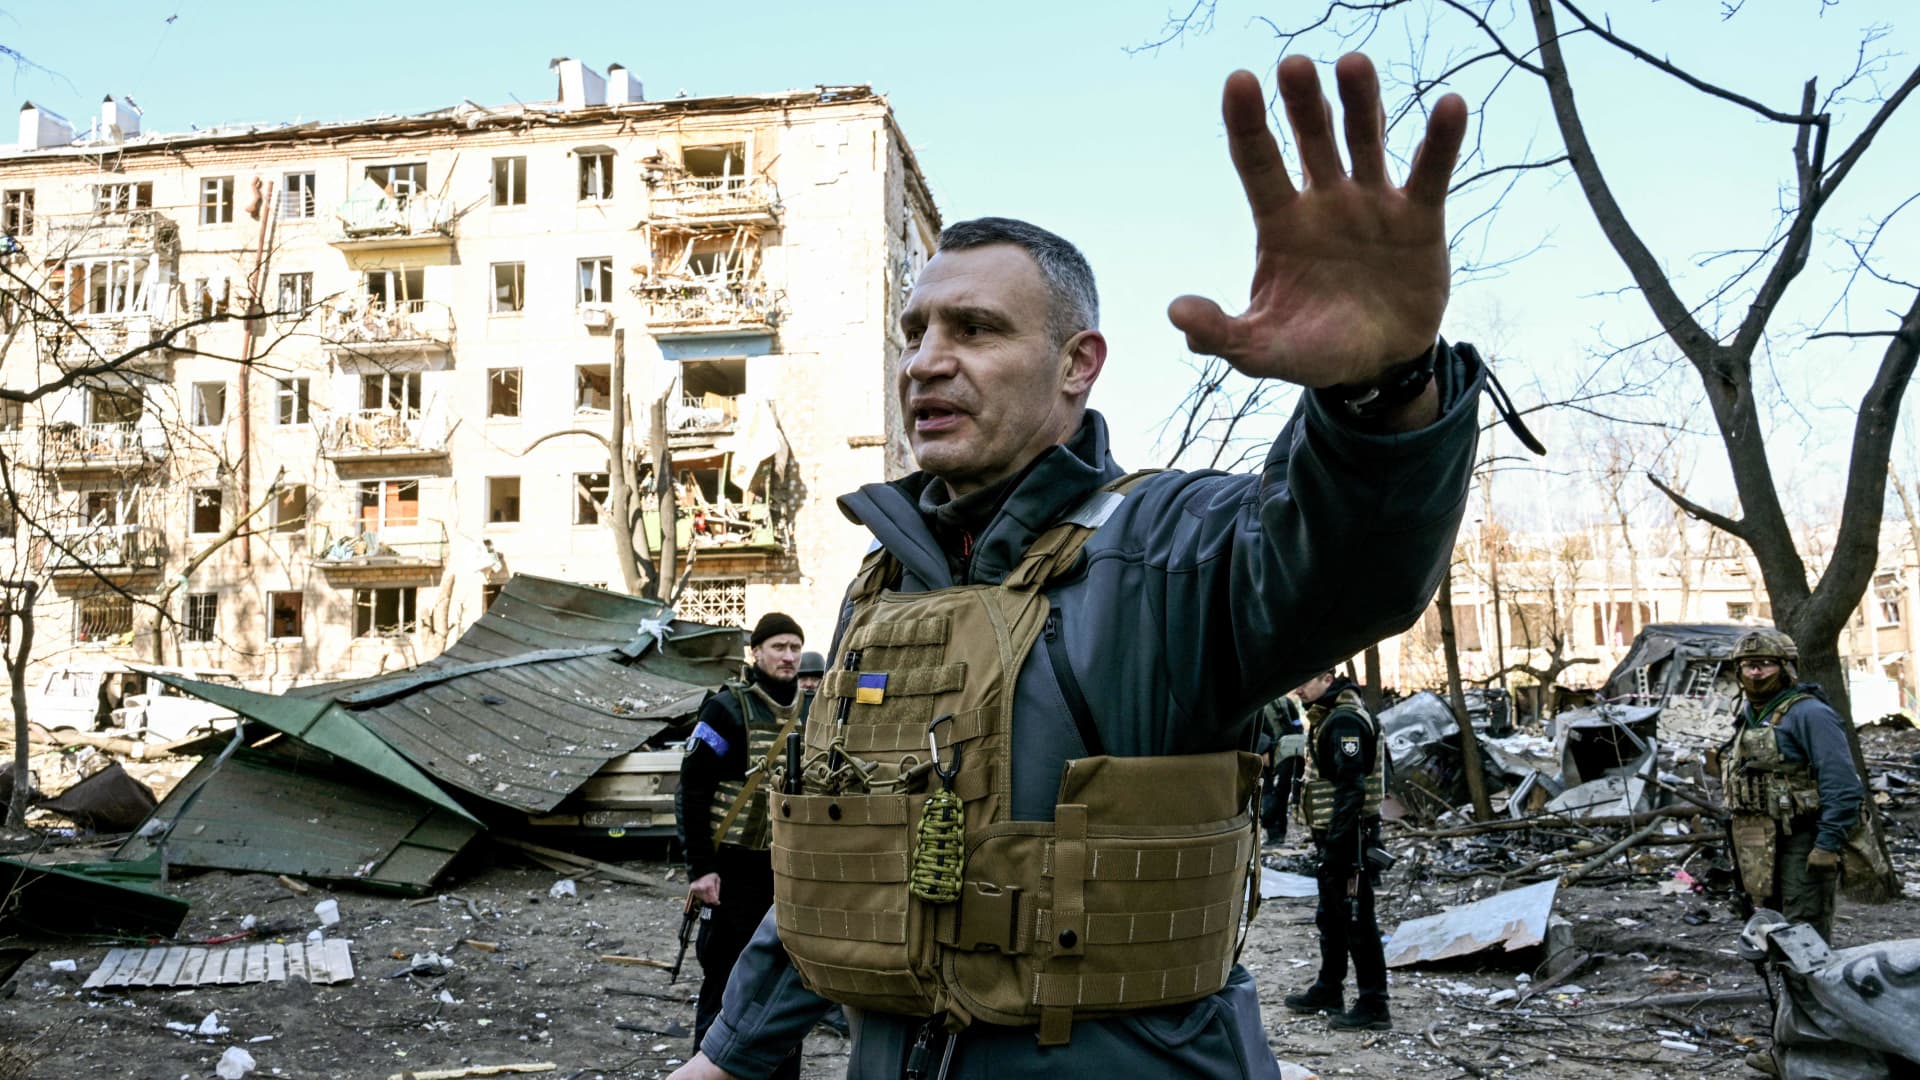 Kyiv's mayor Vitali Klitschko holds people away from a five-storey residential building that partially collapsed after a shelling in Kyiv on March 18, 2022, as Russian troops try to encircle the Ukrainian capital as part of their slow-moving offensive.